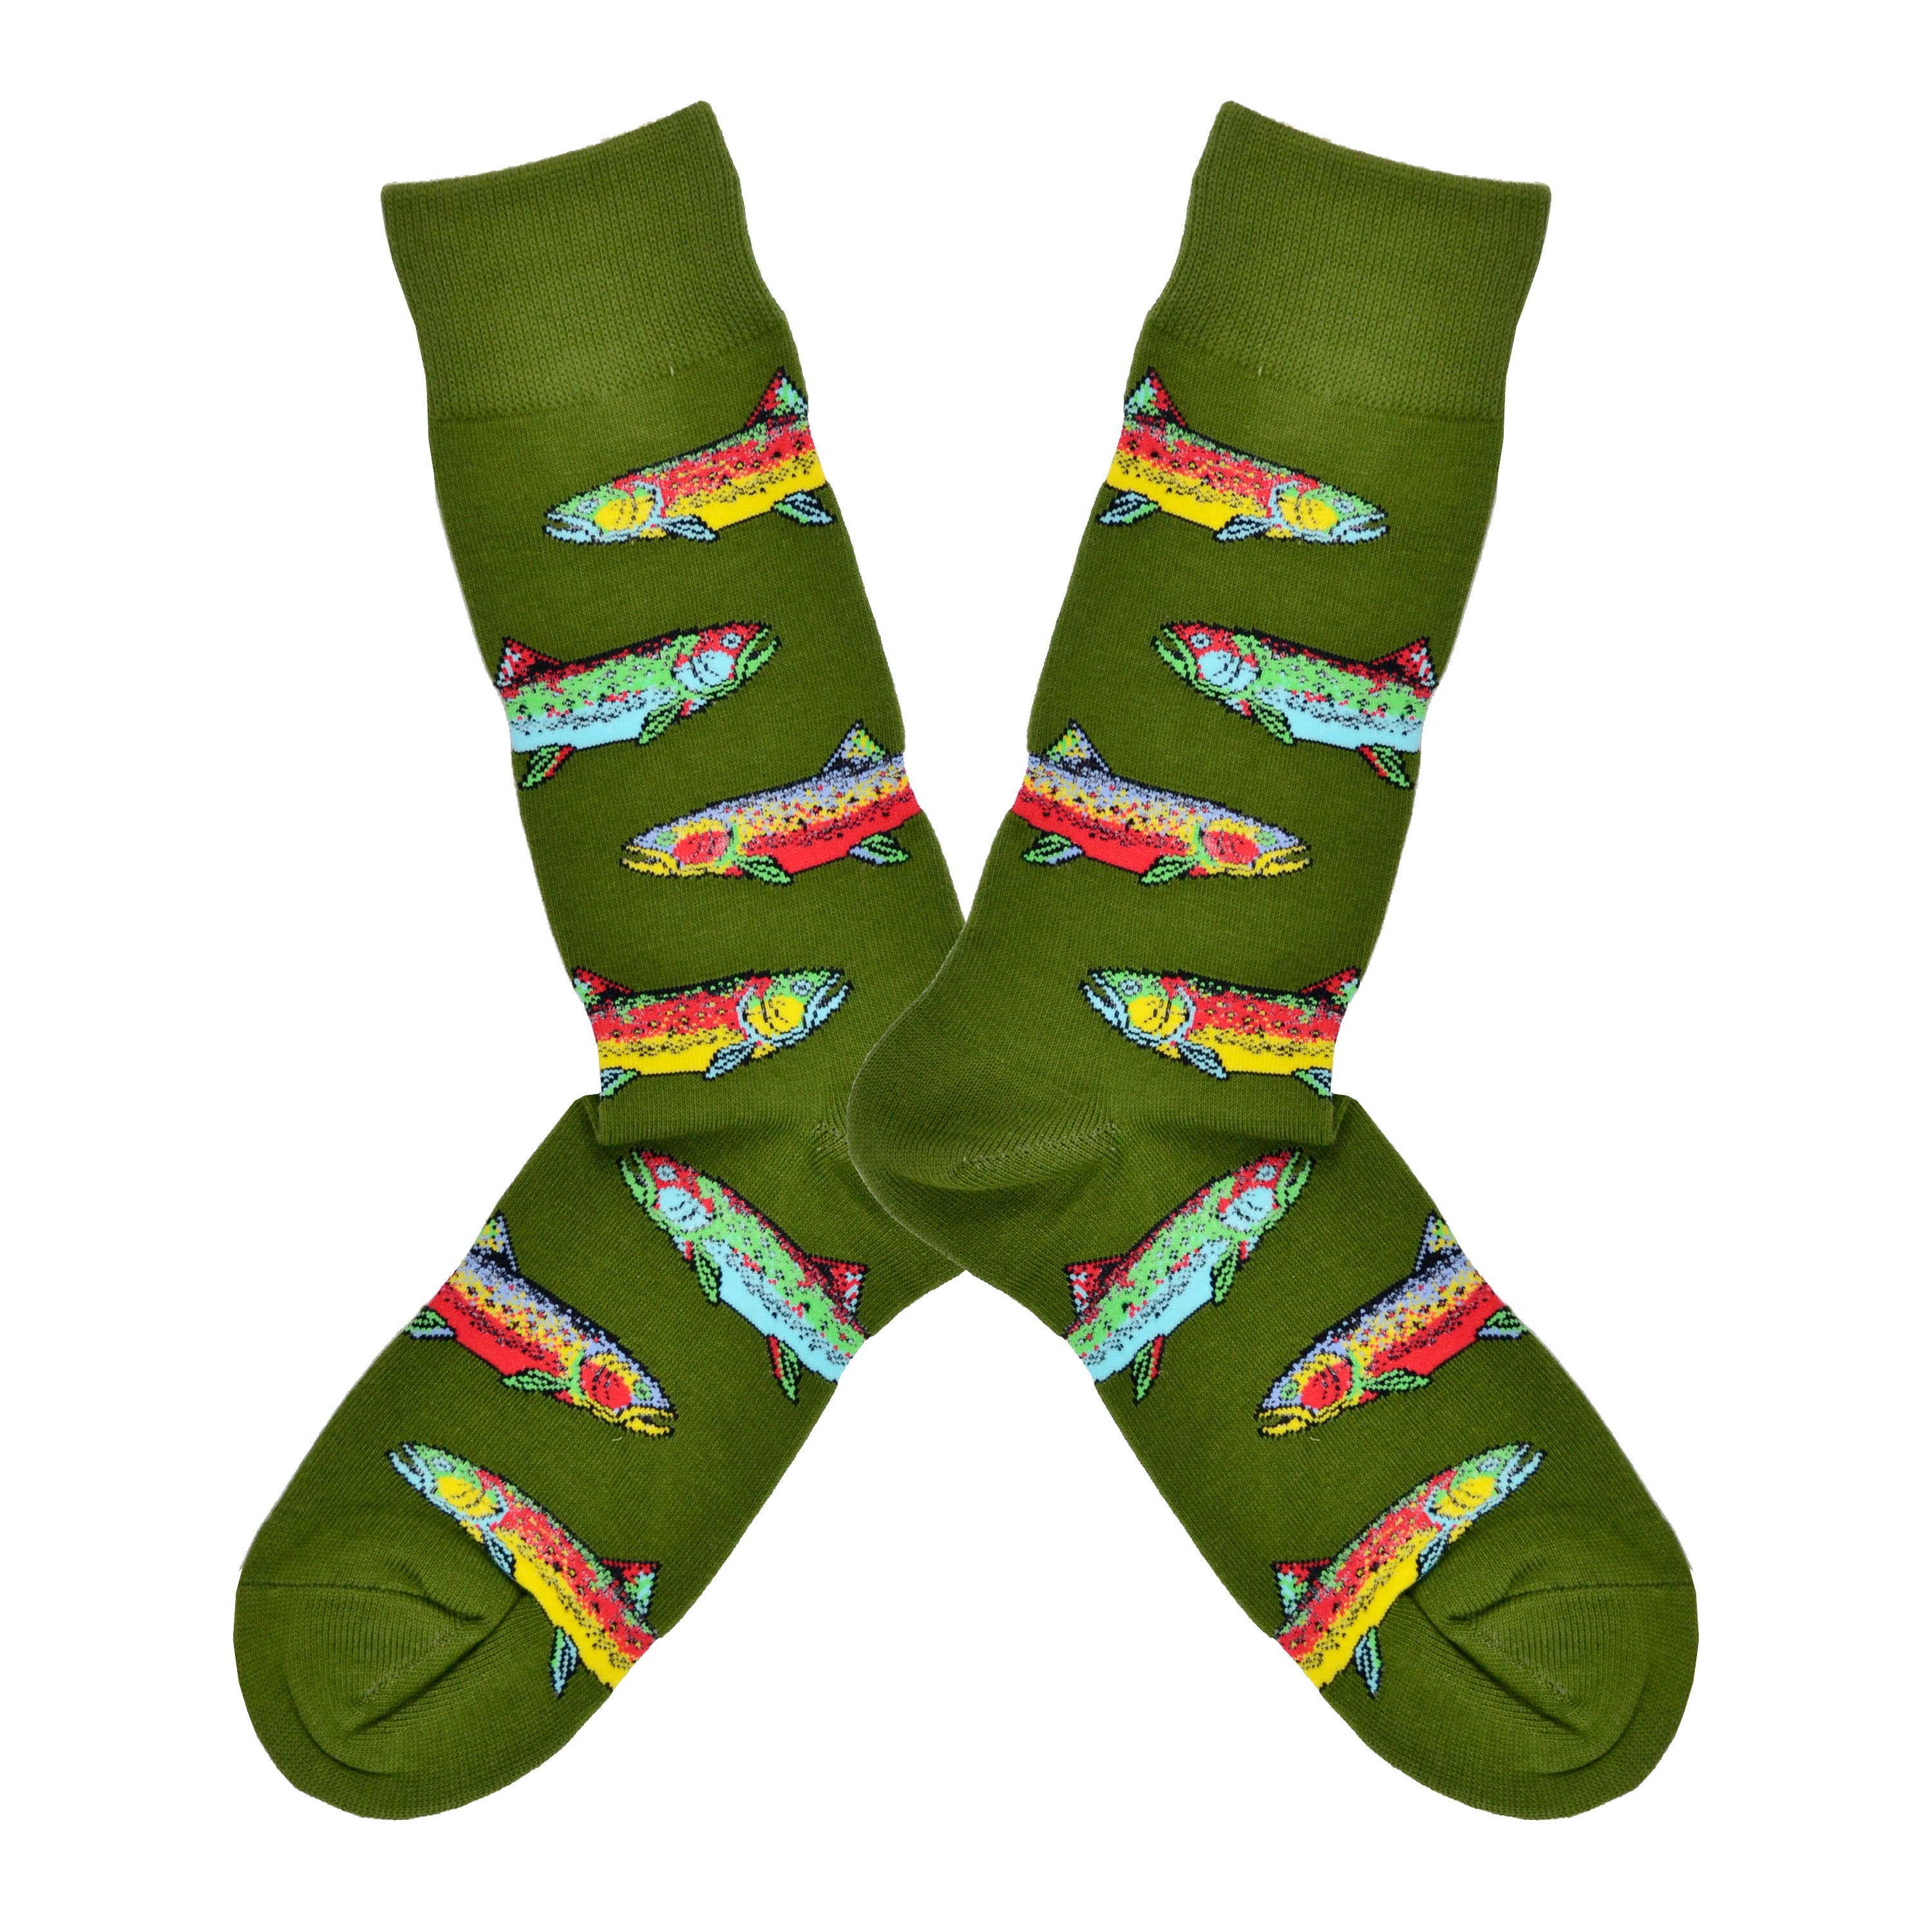 Shown in a flatlay, a pair of Socksmith brand men's cotton crew socks in parrot green with an all over motif of rainbow trout.